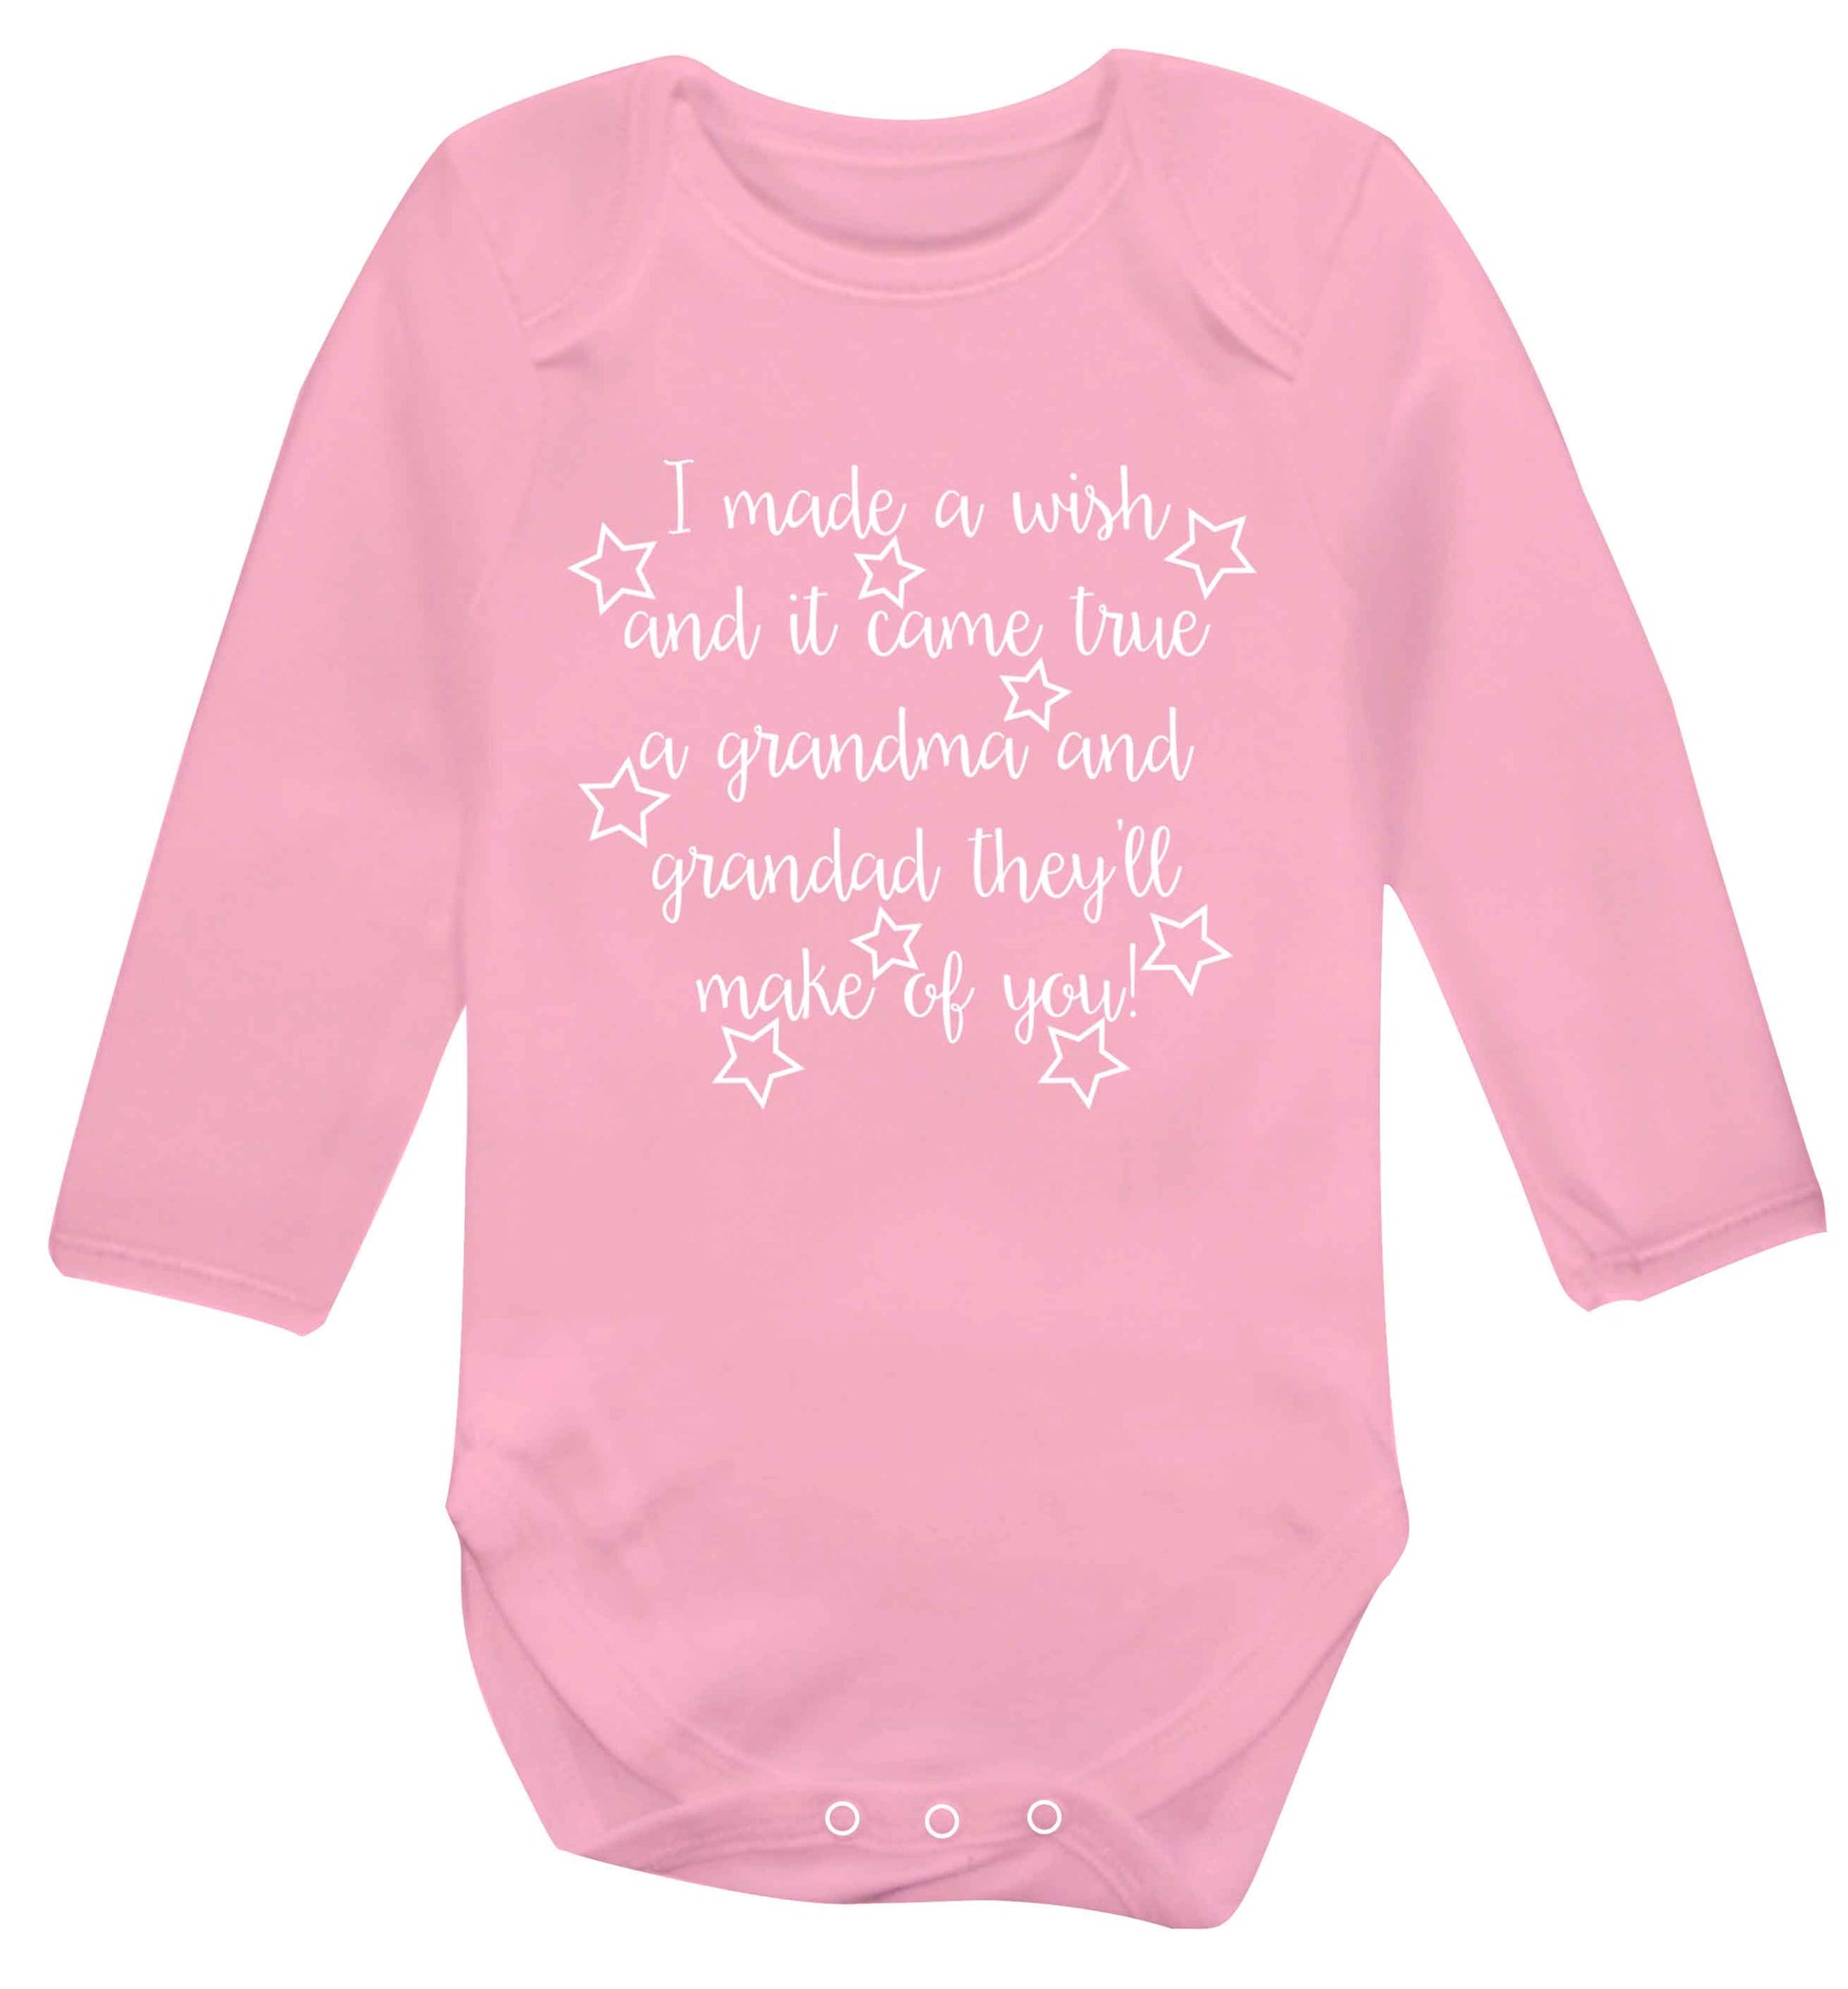 I made a wish and it came true a grandma and grandad they'll make of you! Baby Vest long sleeved pale pink 6-12 months